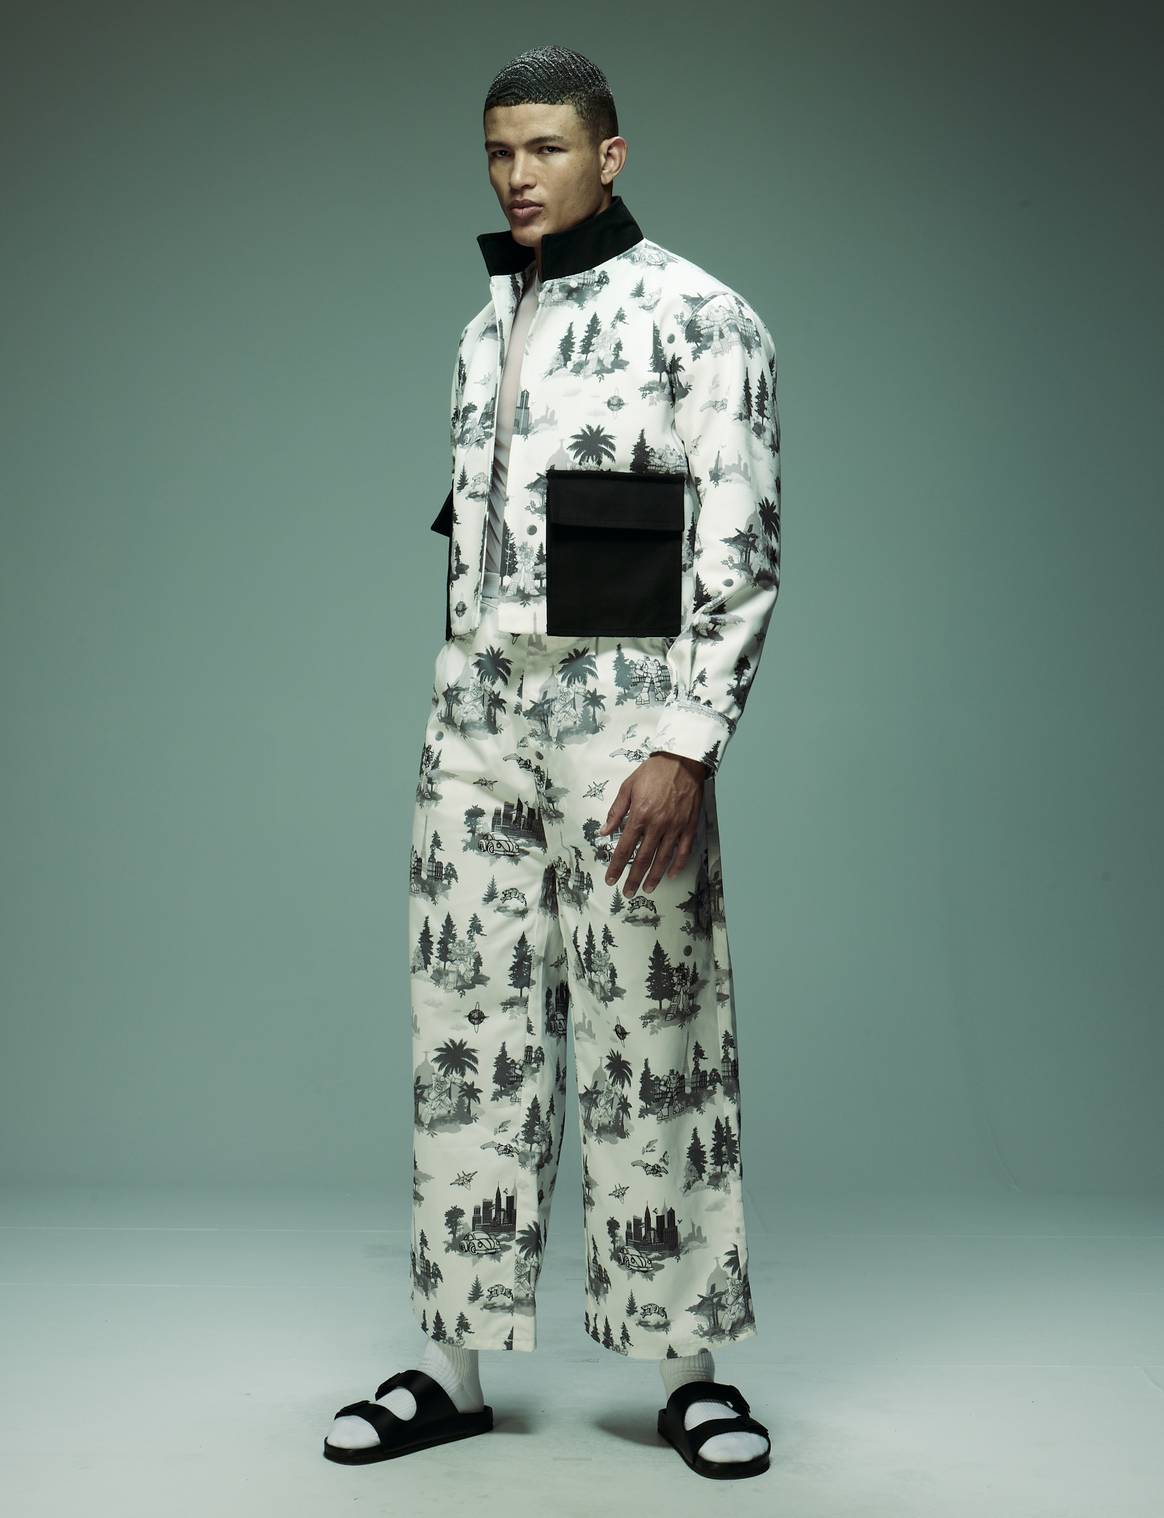 Transformers x Bobby Abley collection